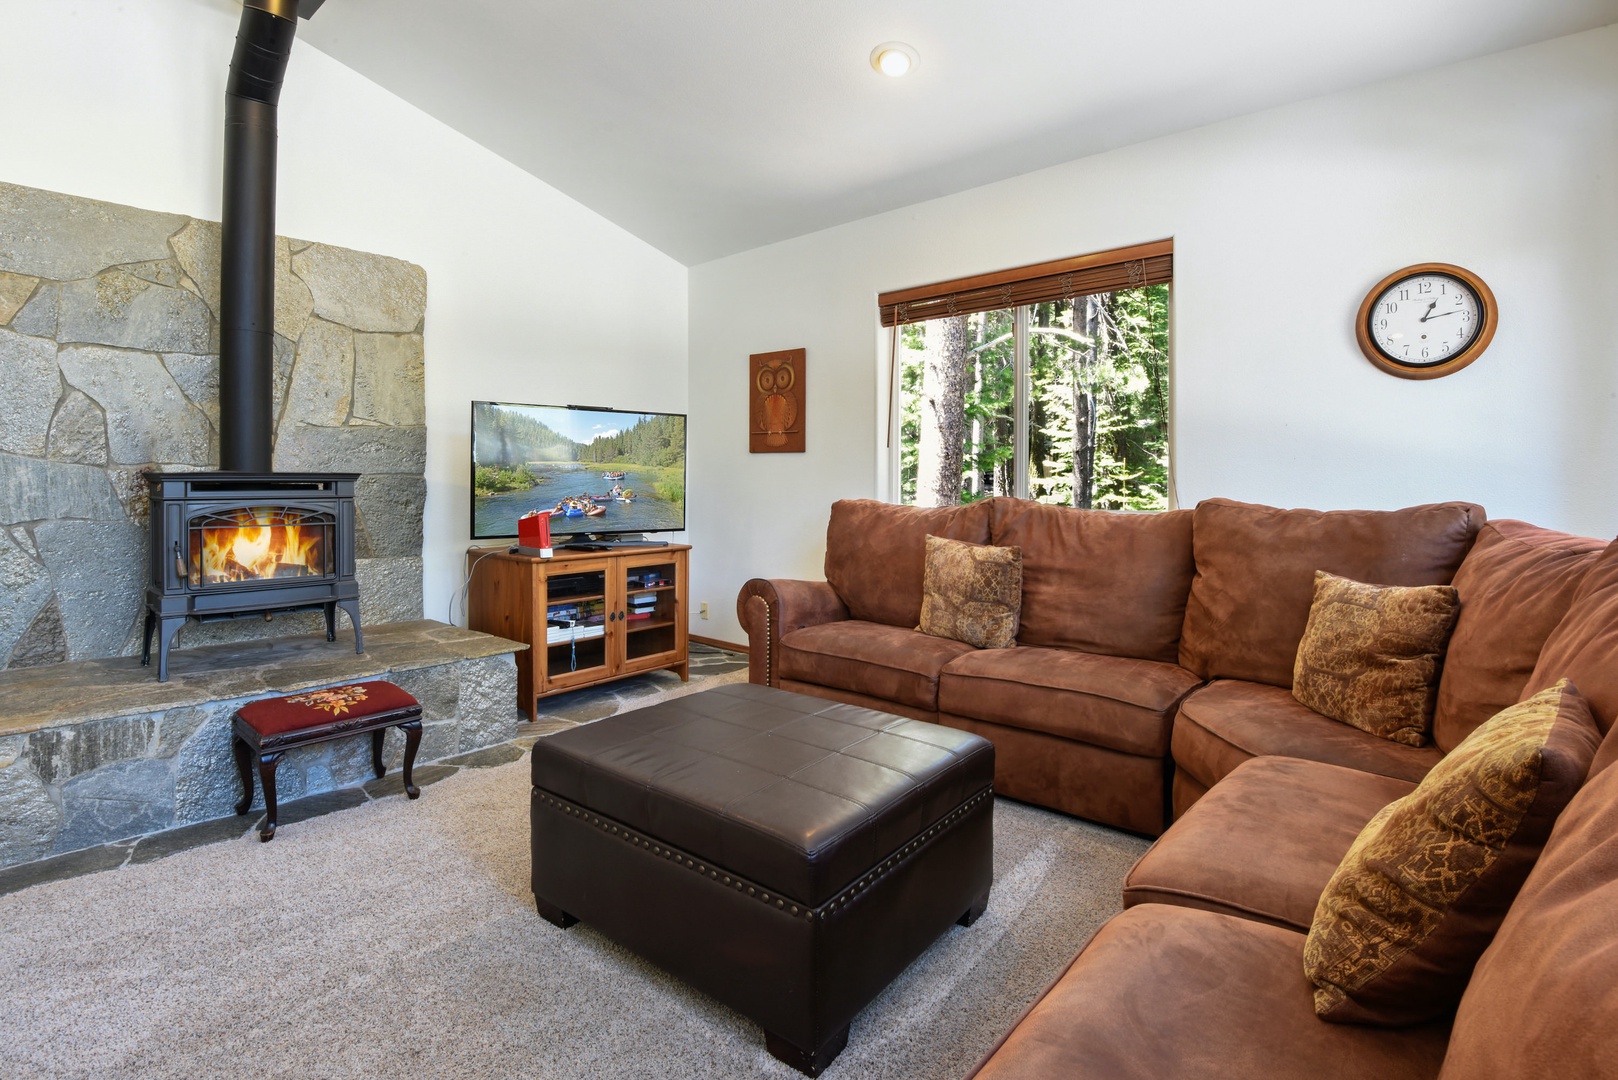 2nd living room with wood burning fireplace, Smart TV, kids play area